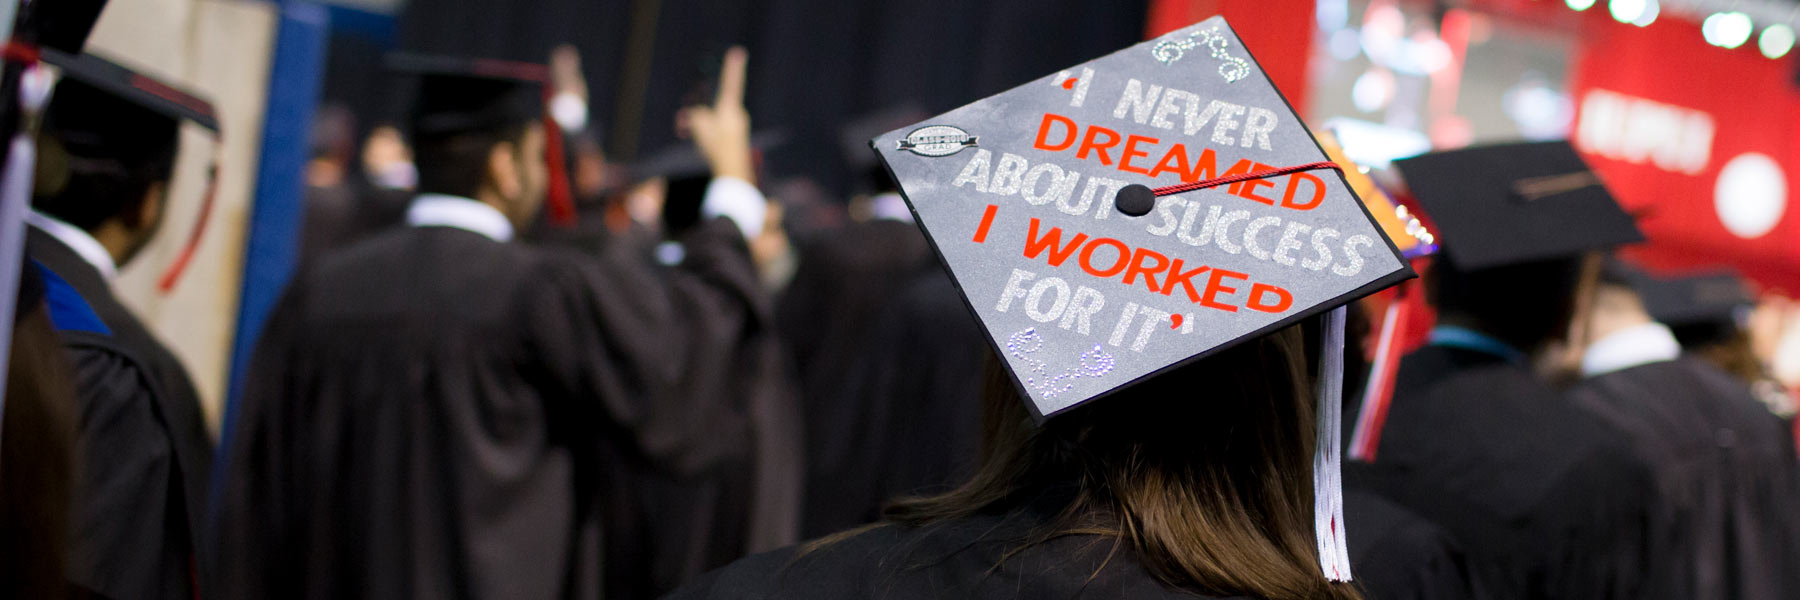 A graduate's mortar board reads 'I never dreamed about success I worked for it'.